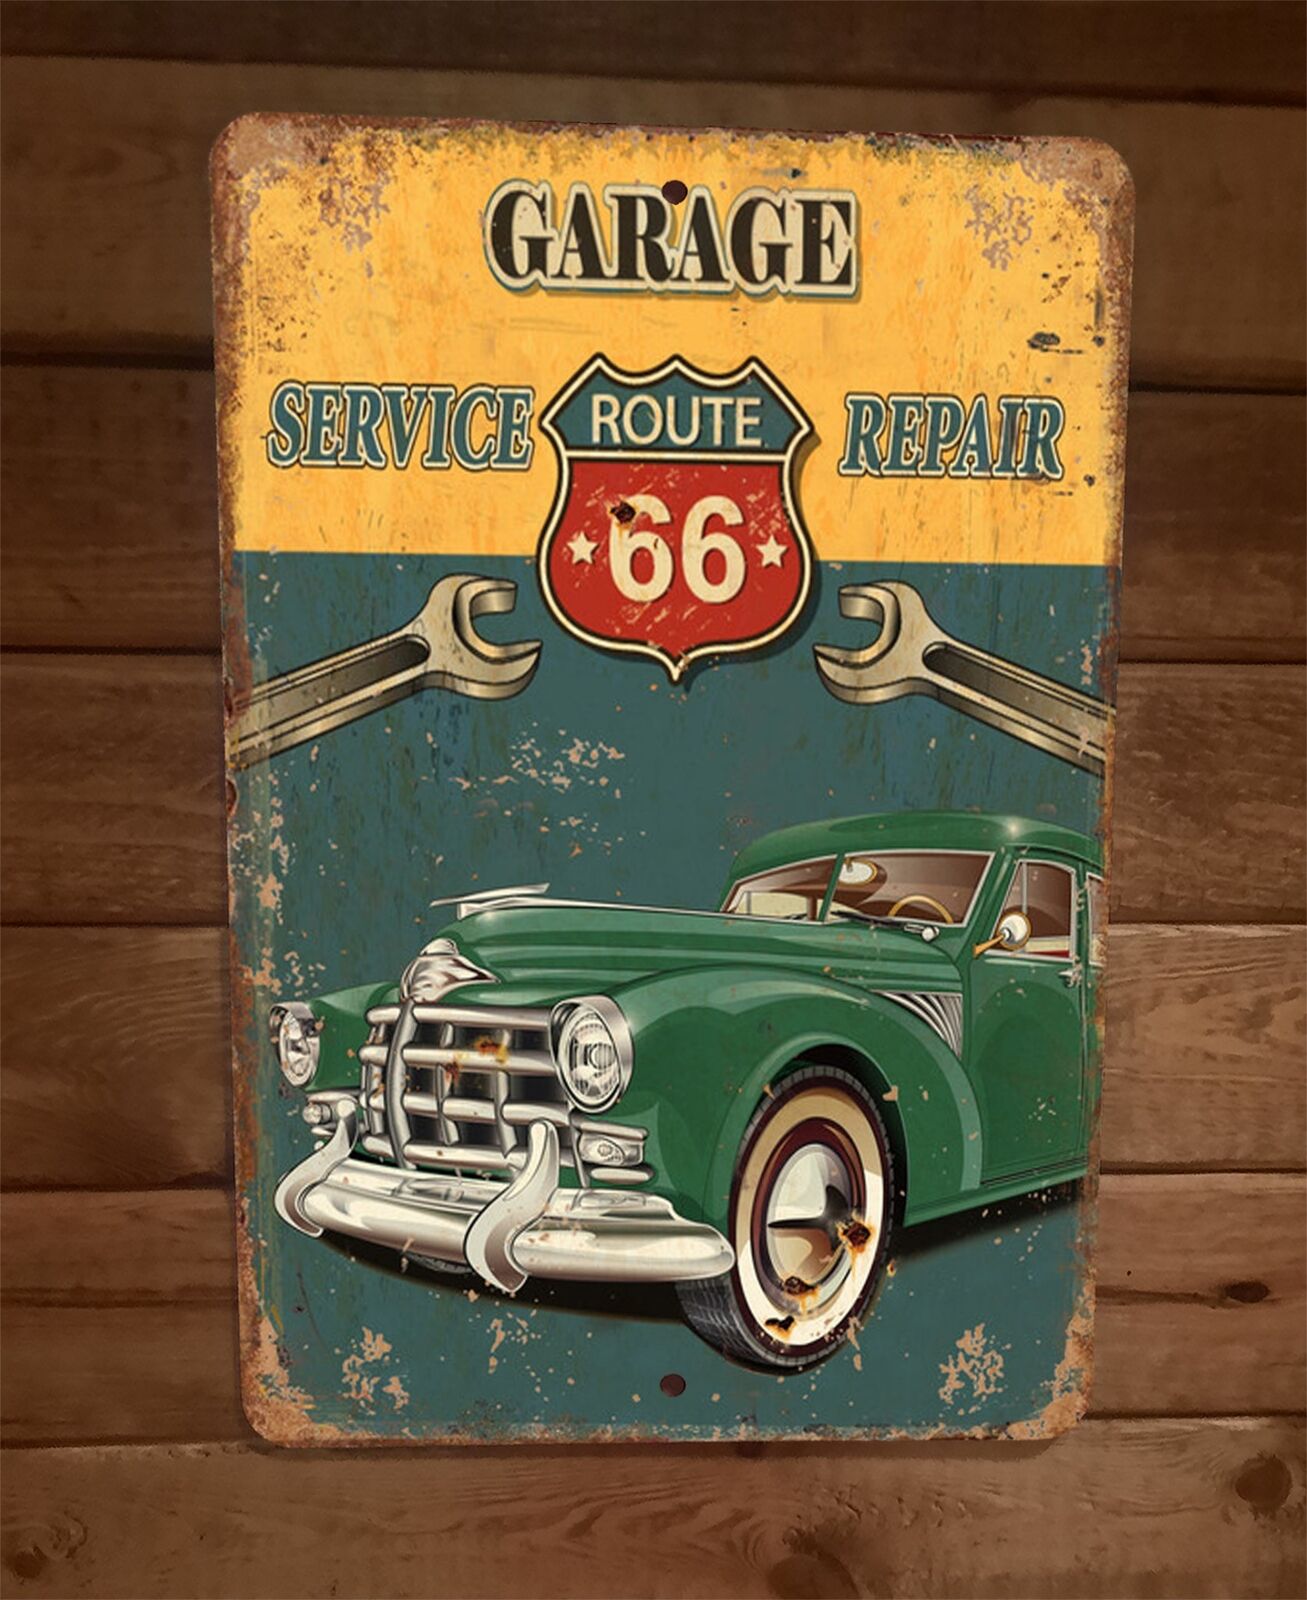 Route 66 Service and Repair 8x12 Metal Wall Sign Garage Poster